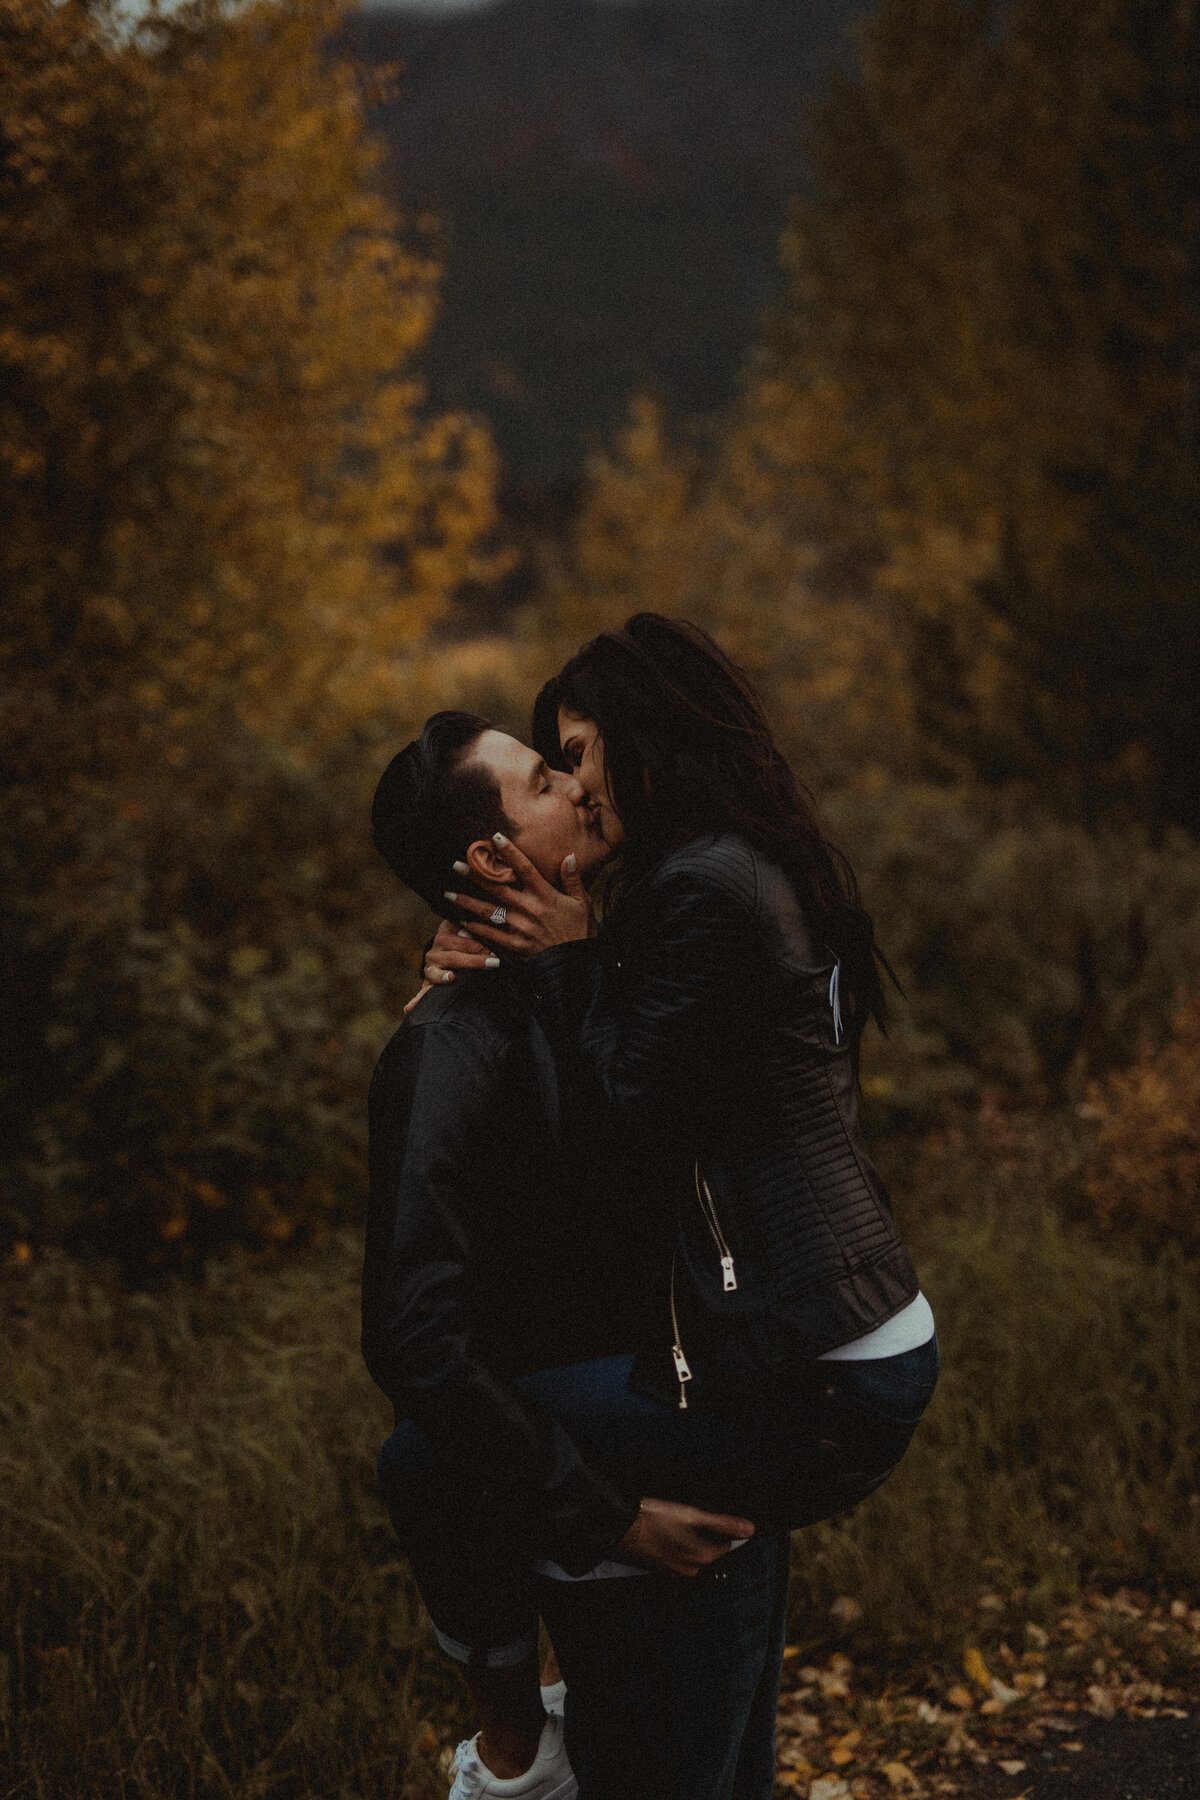 engagement photos during adventurous fall day